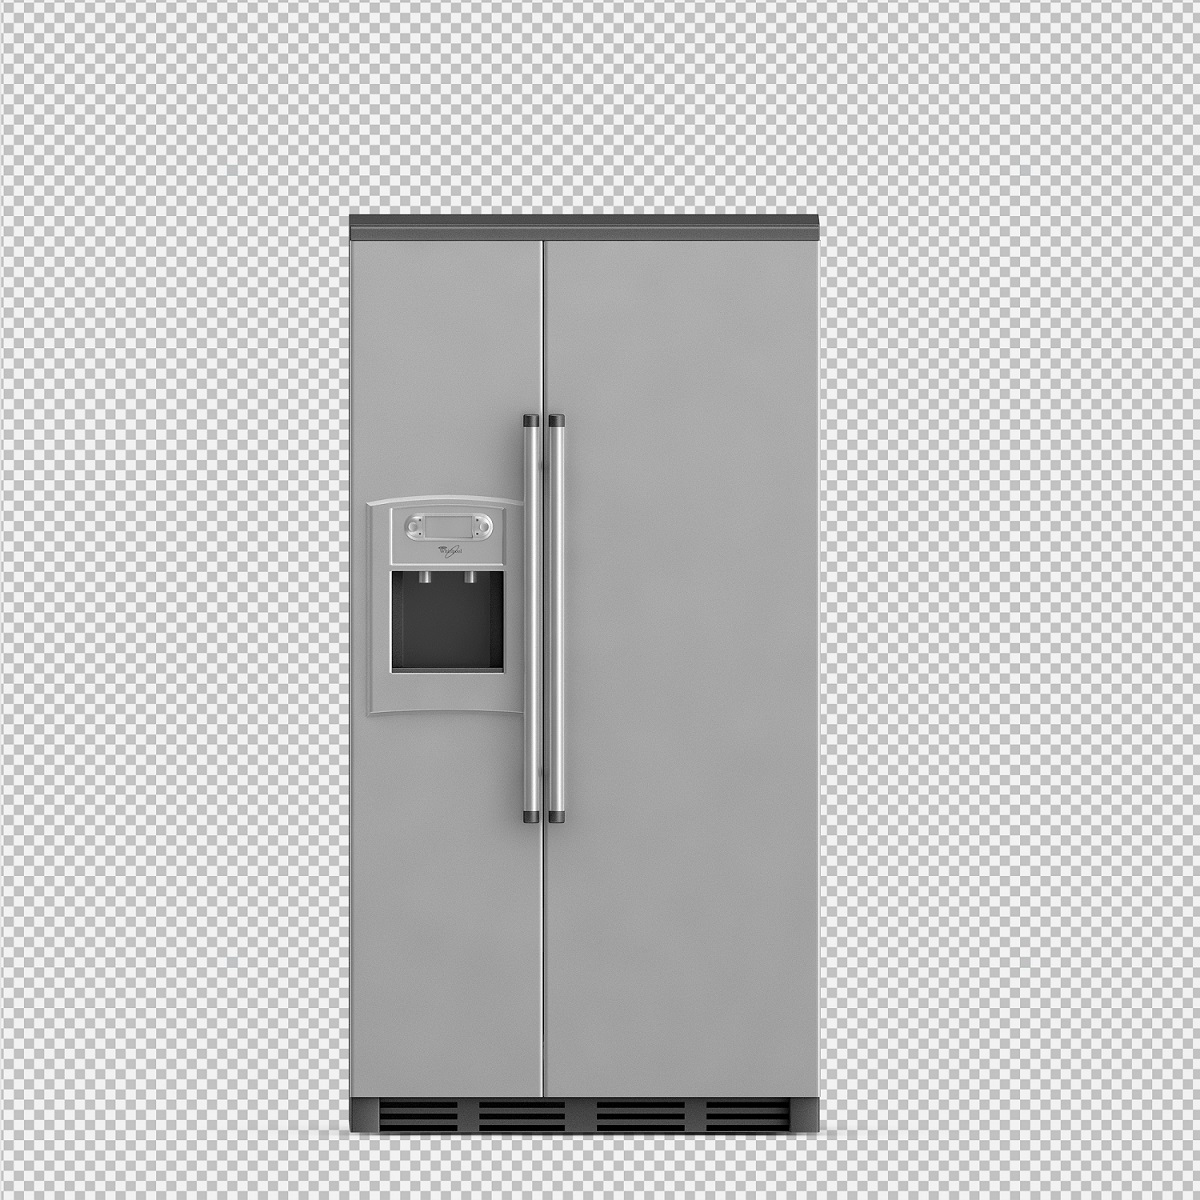 Refrigerator Repair – Chilled Air Con